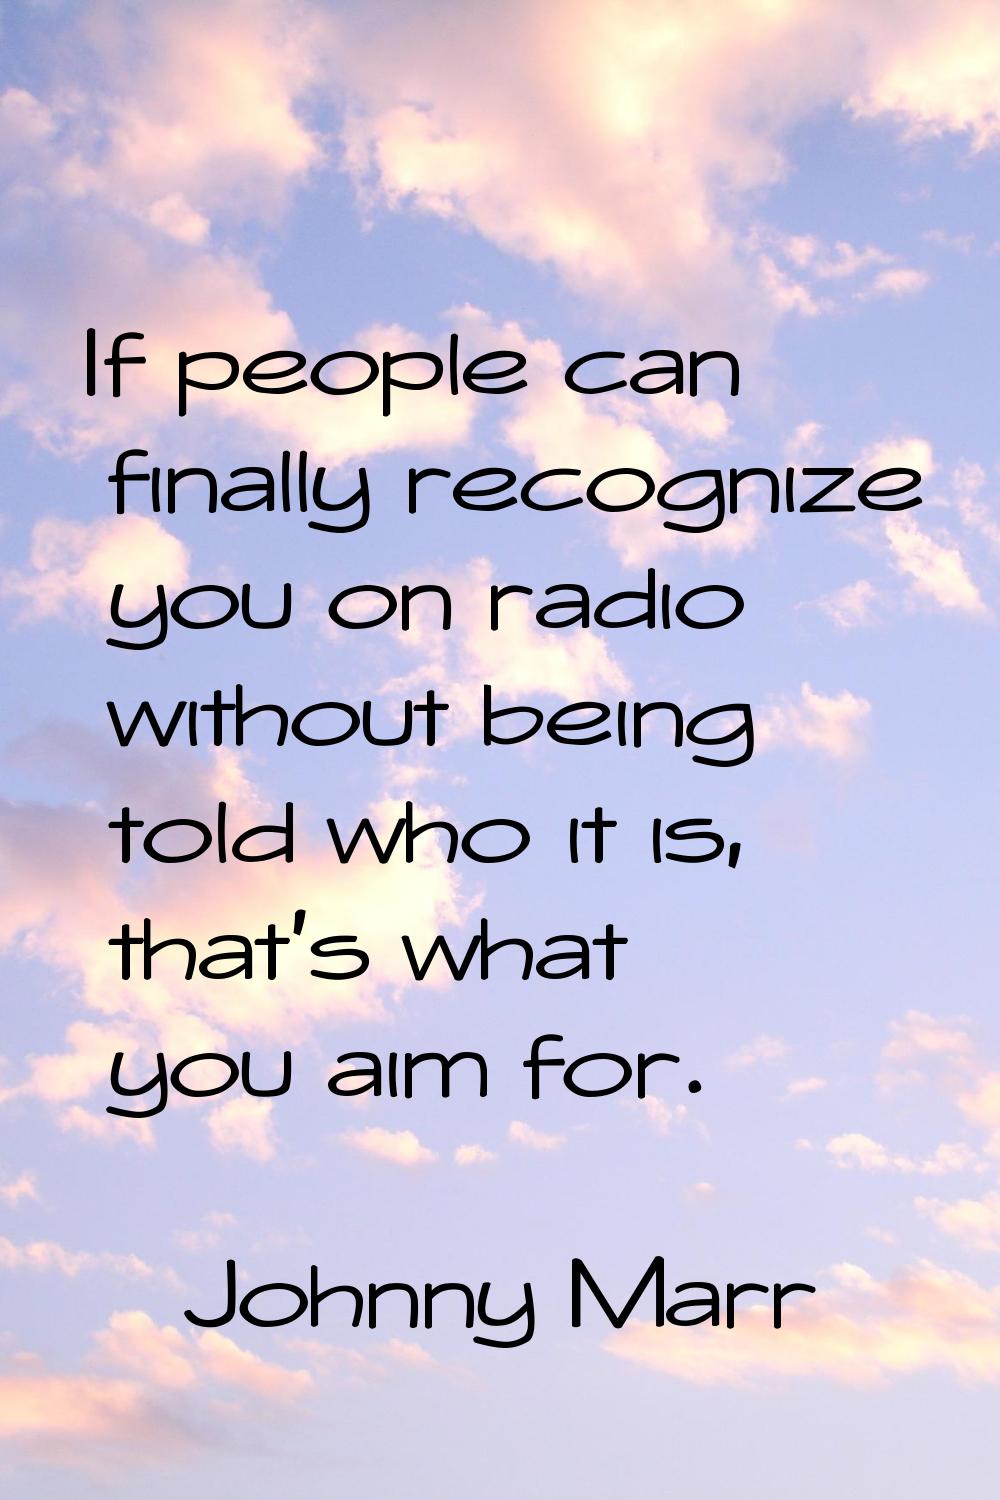 If people can finally recognize you on radio without being told who it is, that's what you aim for.